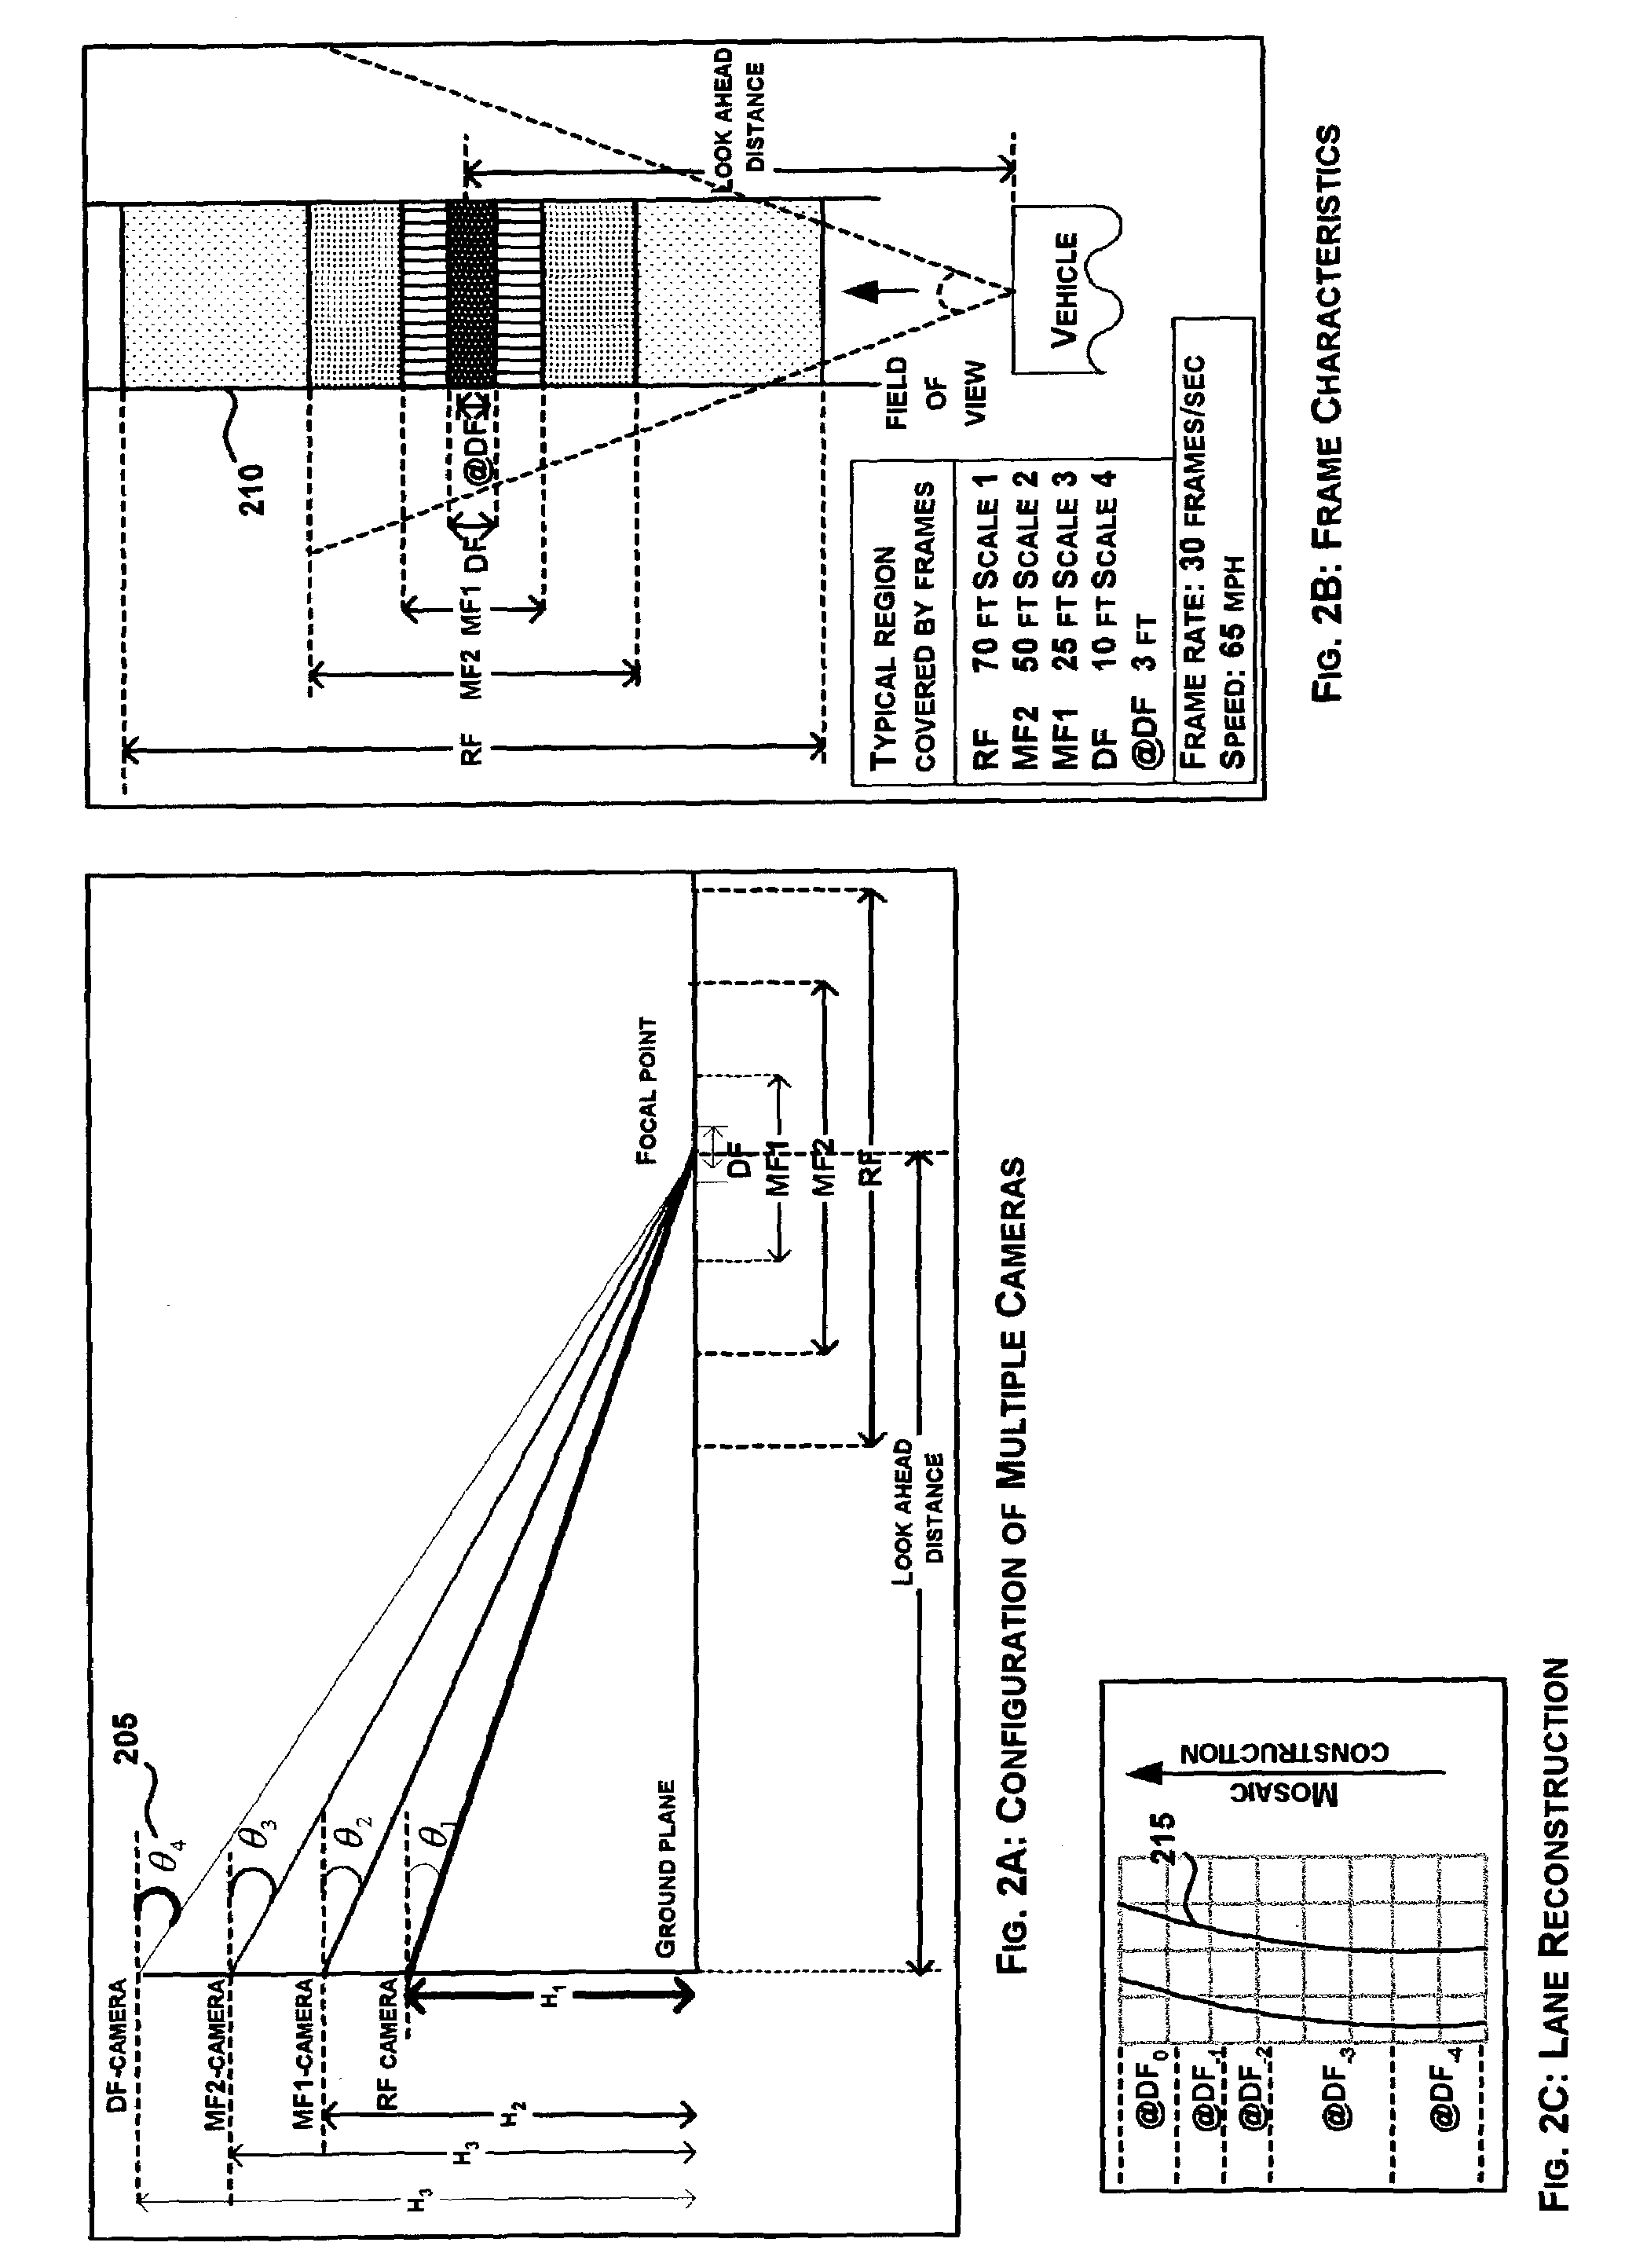 System and method for warning drivers based on road curvature